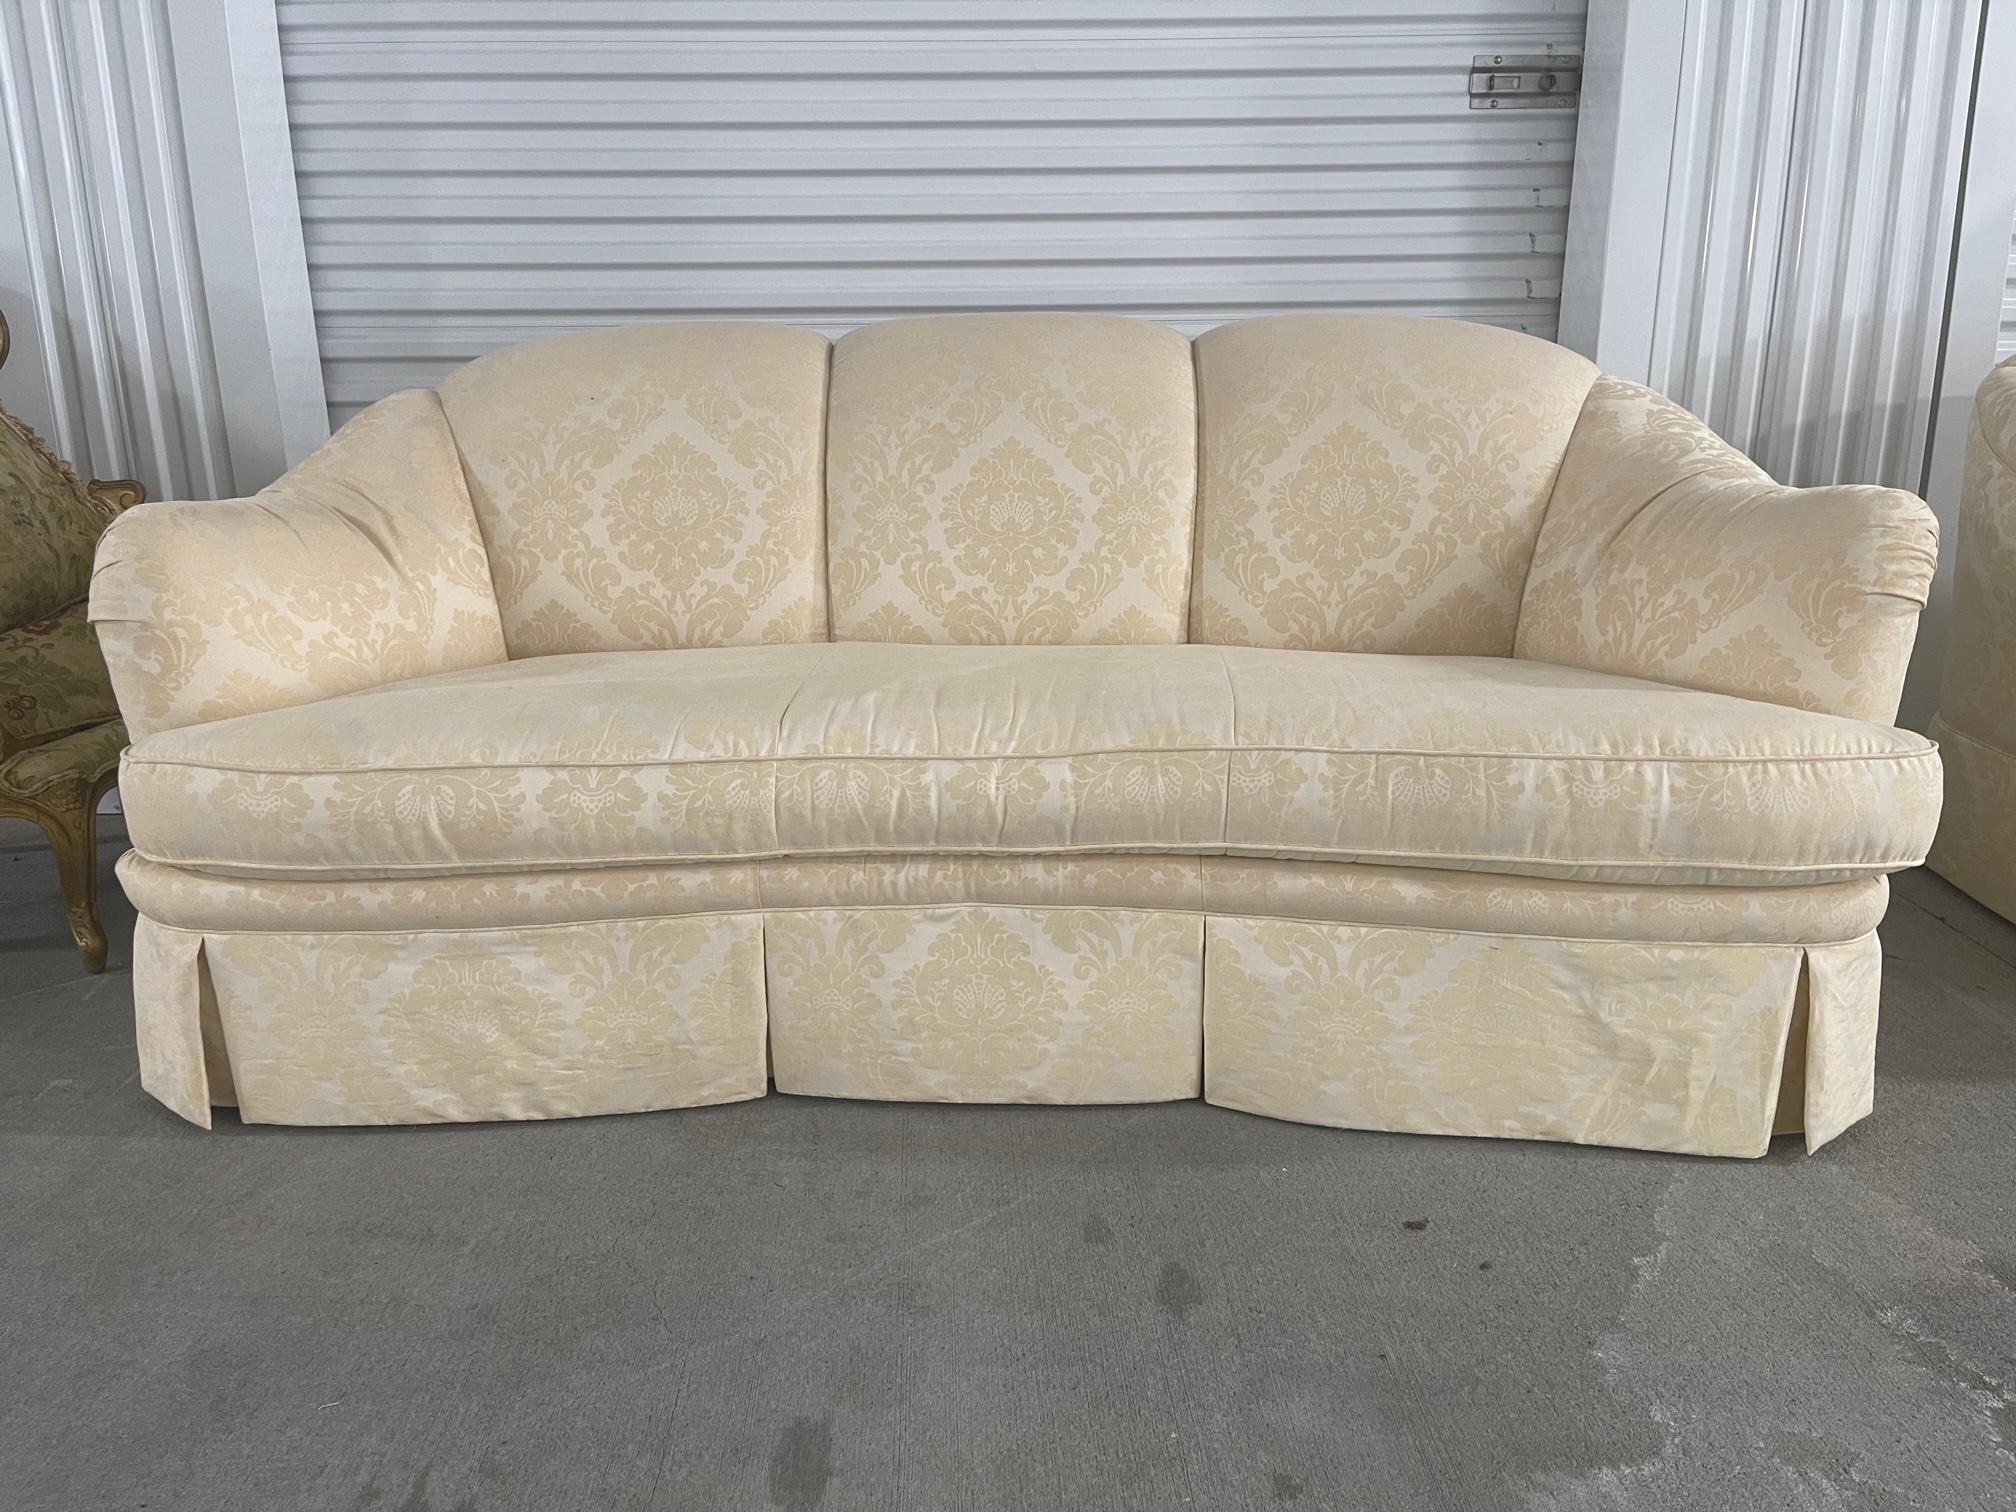 20th Century English scalloped style arm sofa with a serpentine front and upholstered in off white damask.